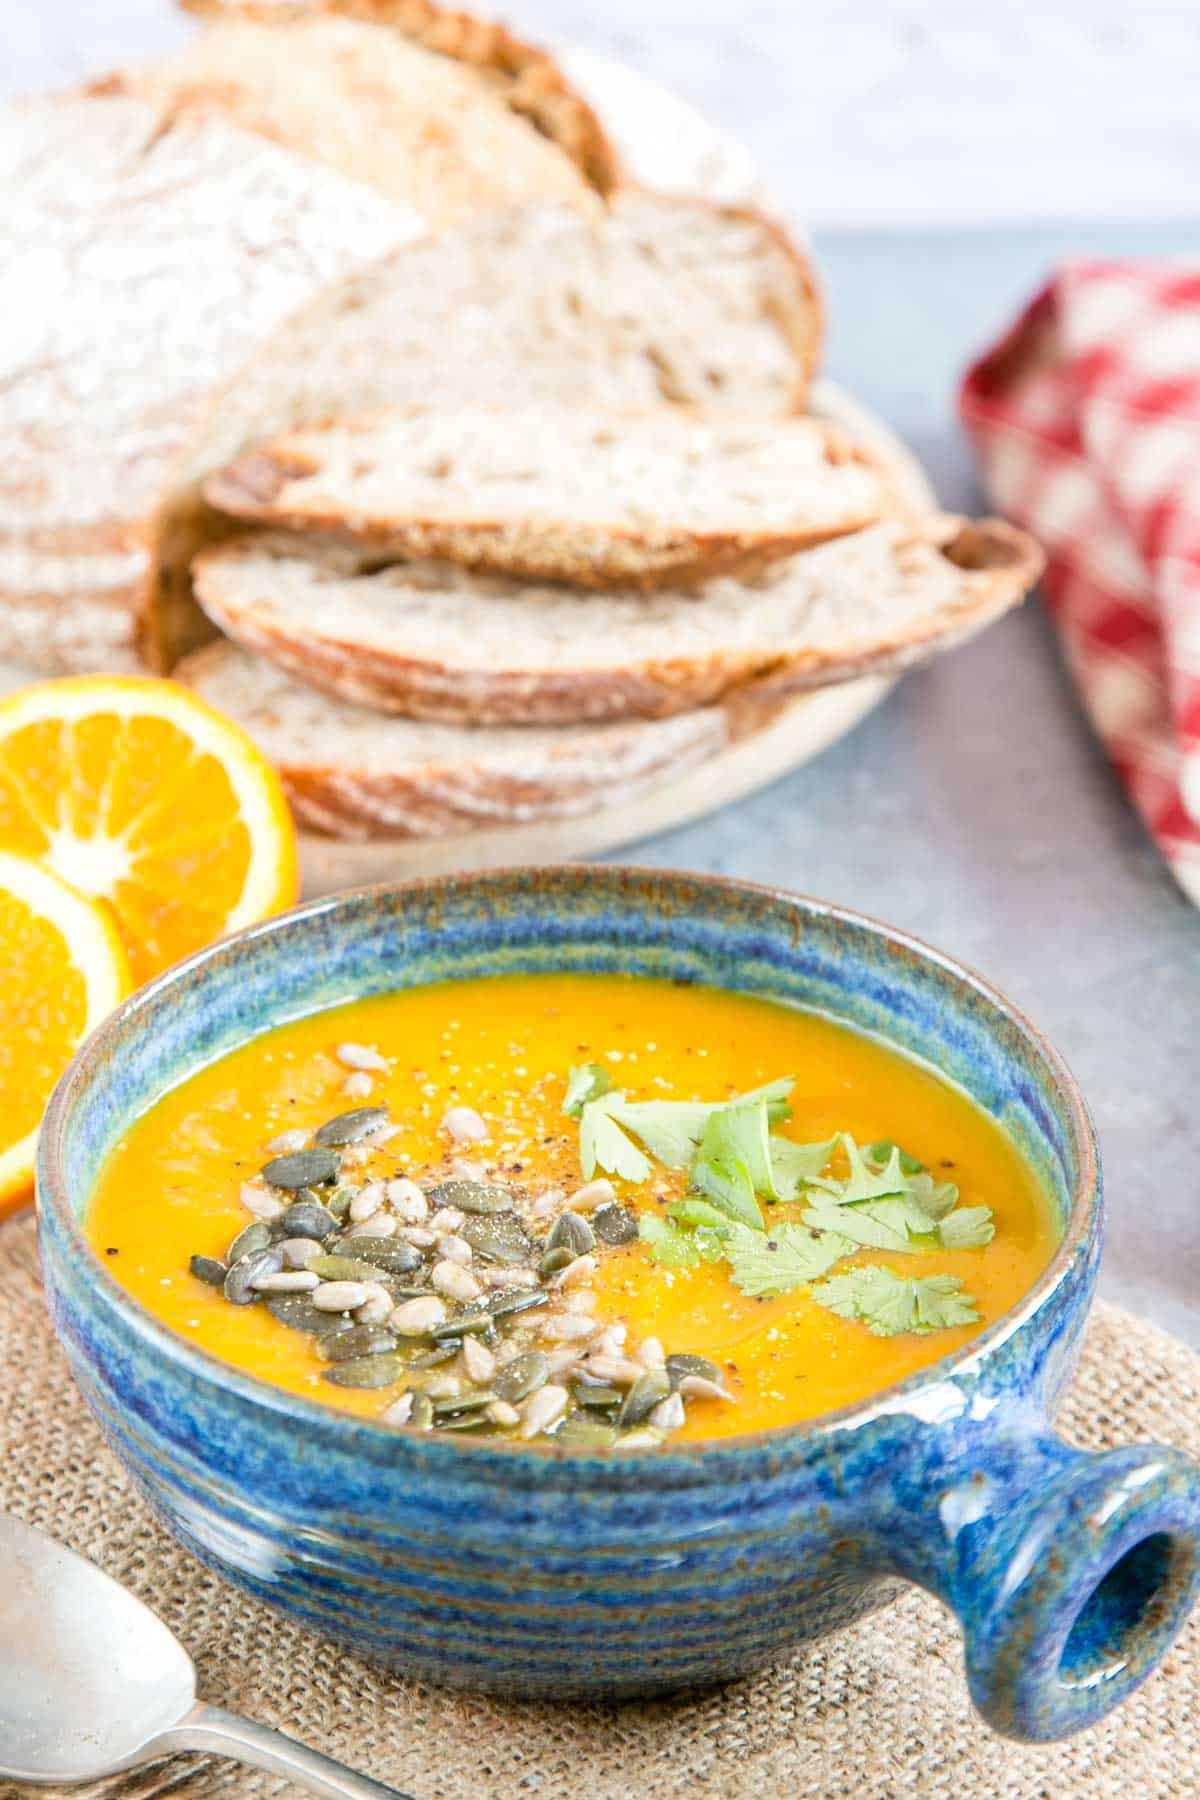 Spiced butternut squash soup served in a blue glazed bowl that contrasts with the orange soup.